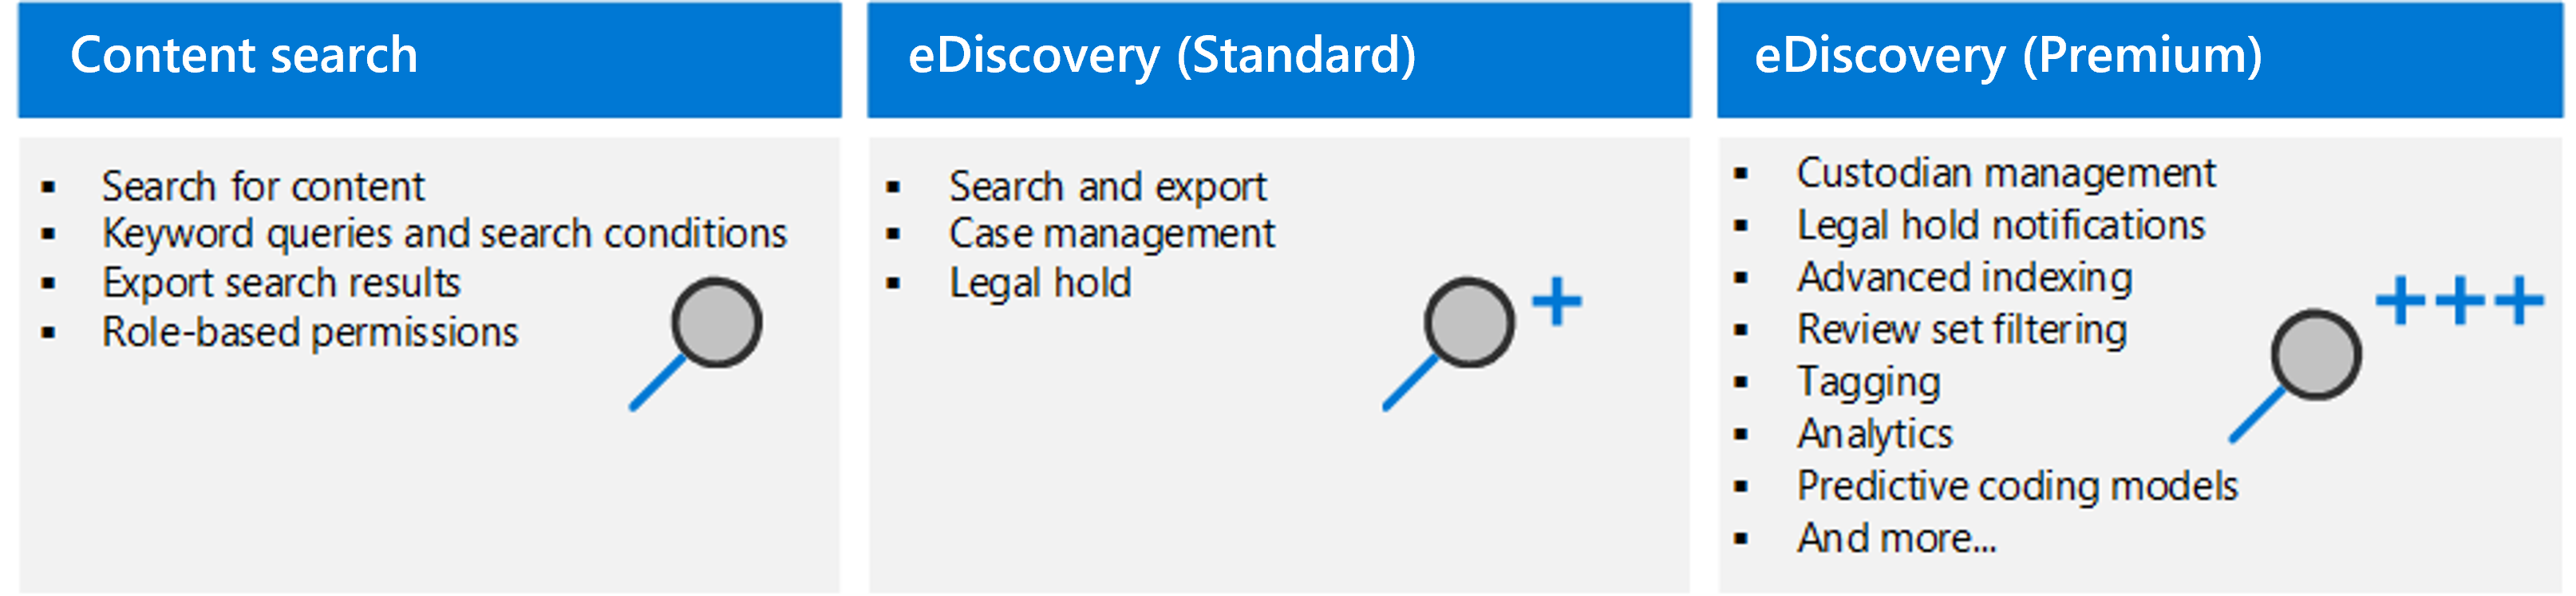 A table that shows the two Microsoft Purview eDiscovery solutions: eDiscovery (Standard), and eDiscovery (Premium).